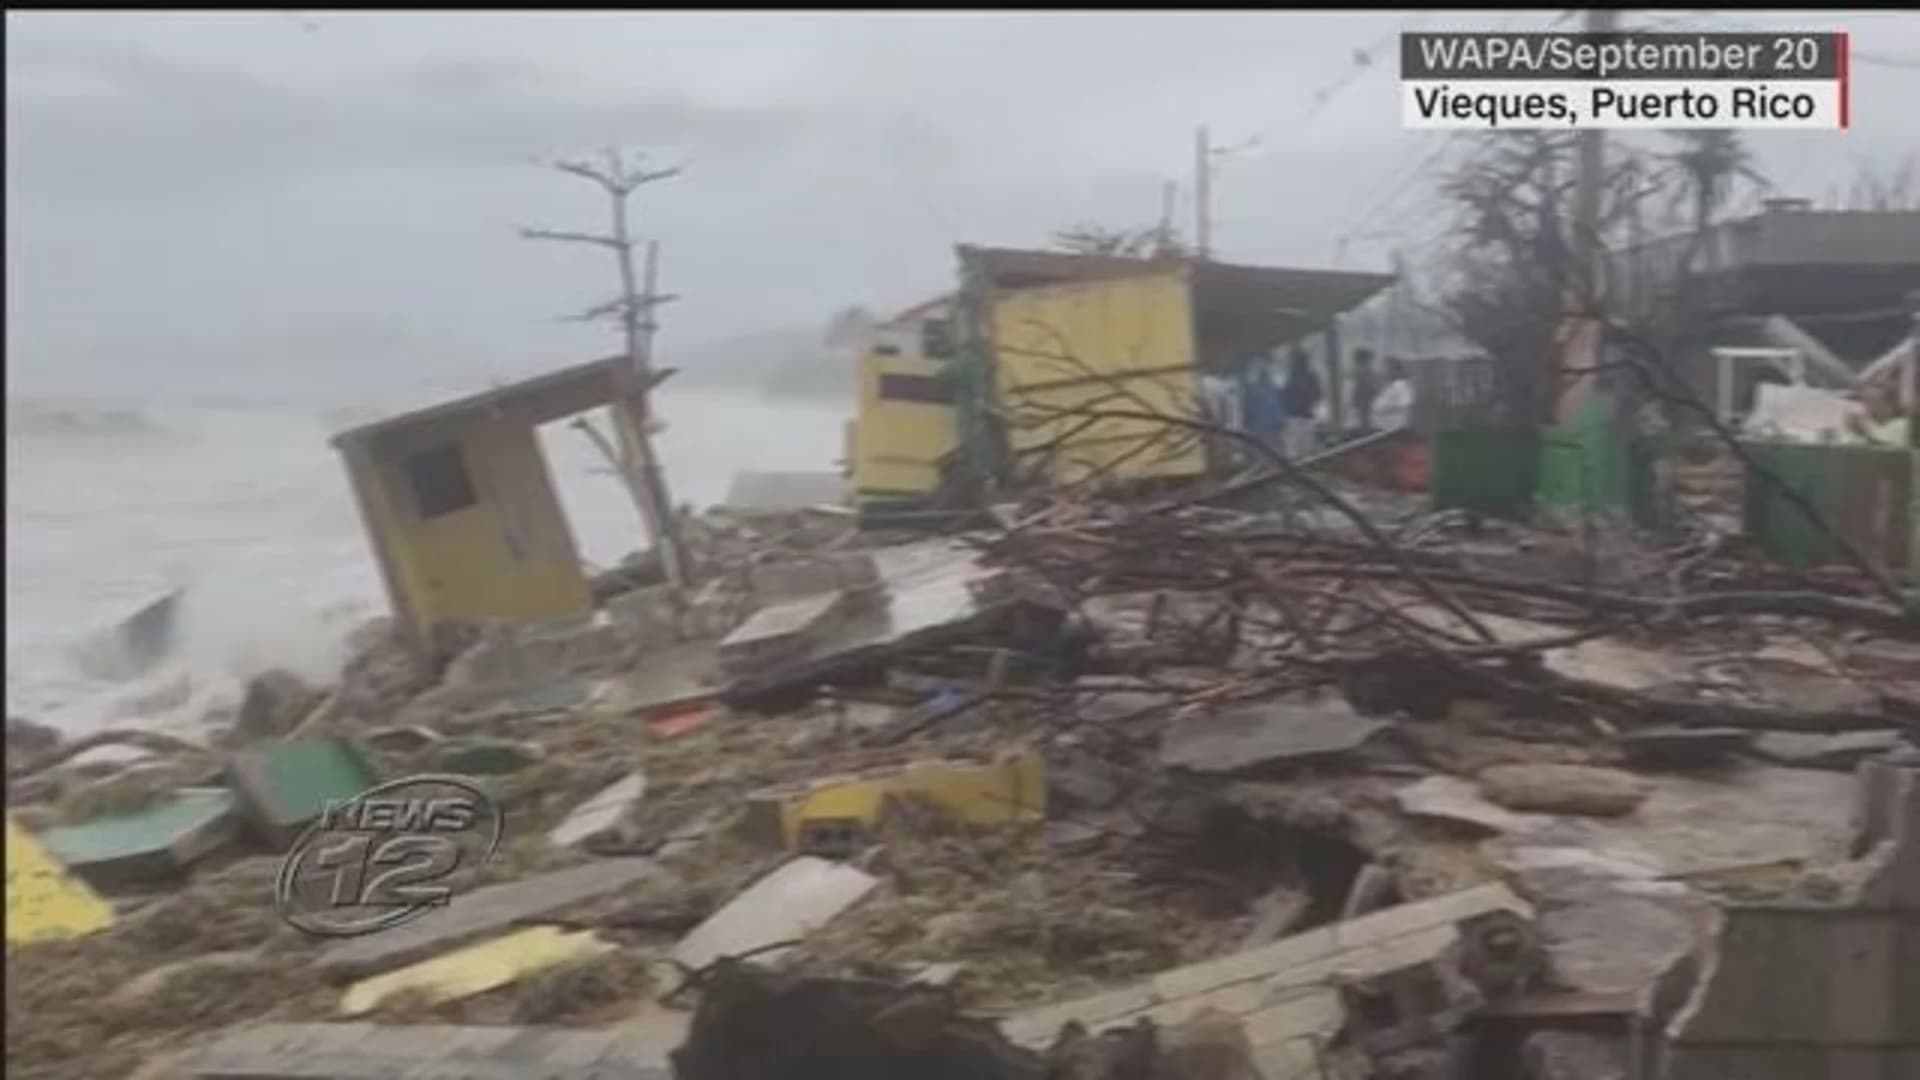 Puerto Rico marks 1 year since Maria with song and sadness